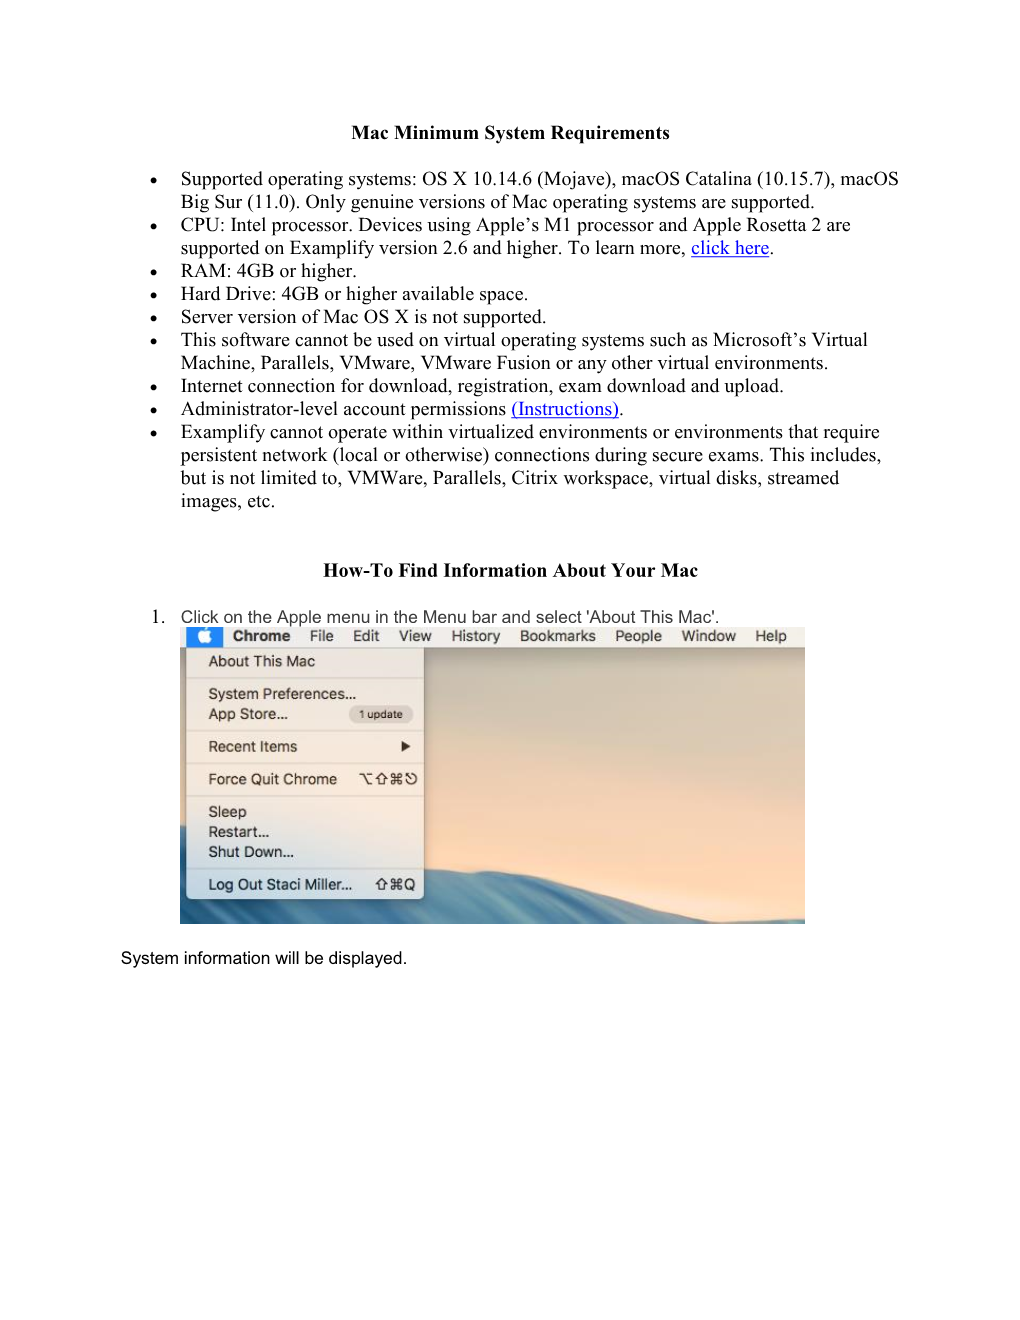 Mac Minimum System Requirements Supported Operating Systems: OS X